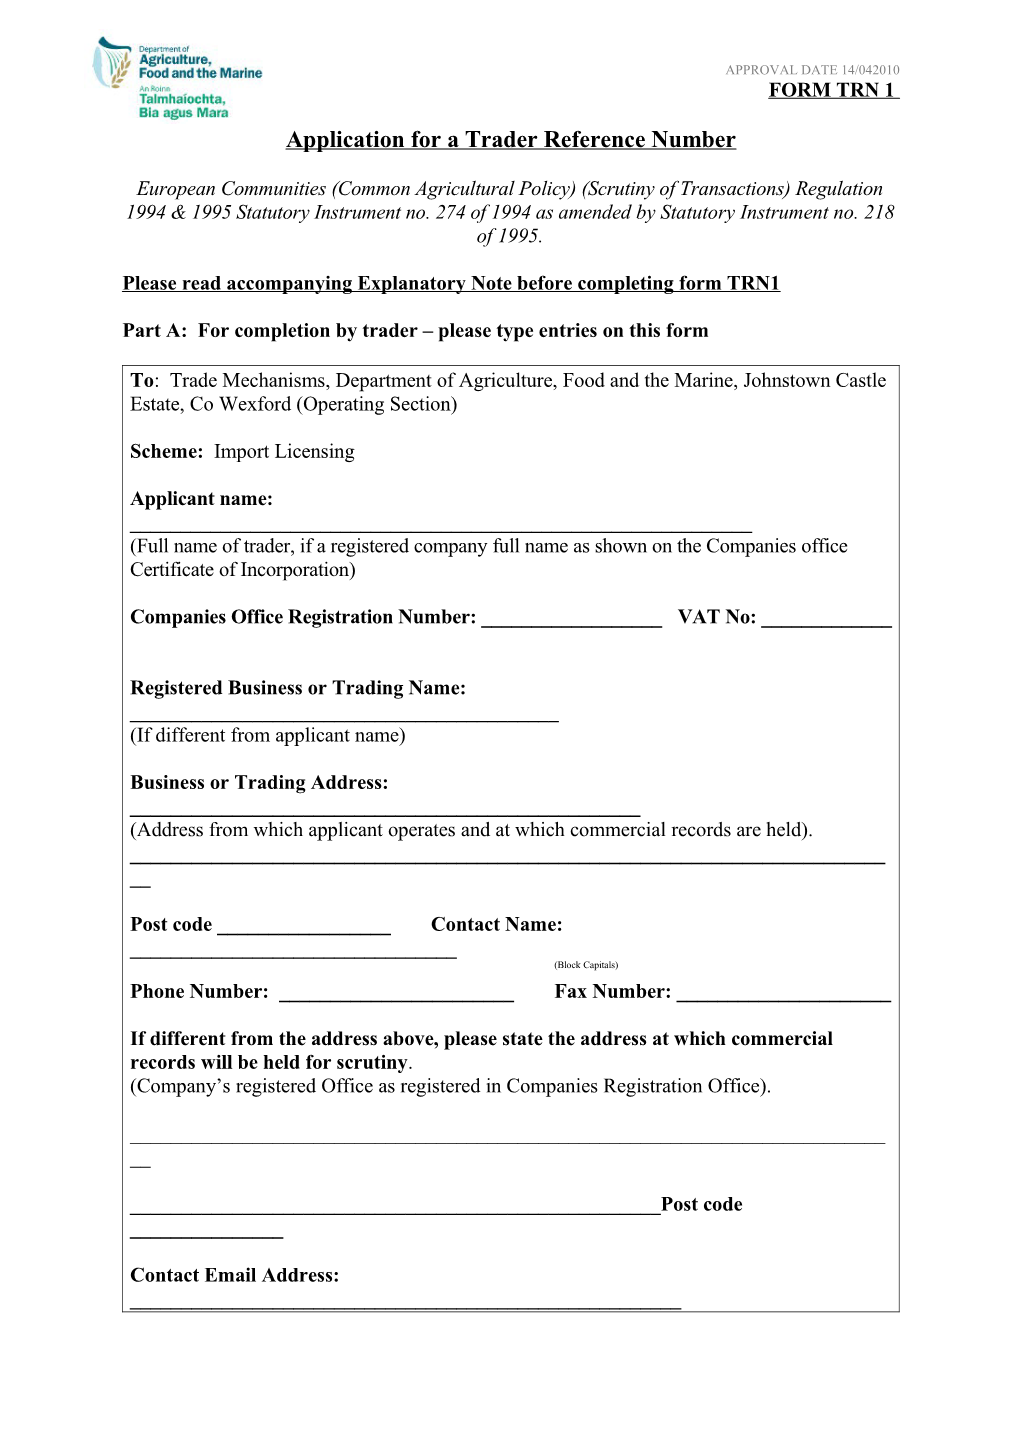 Application for a Trader Reference Number